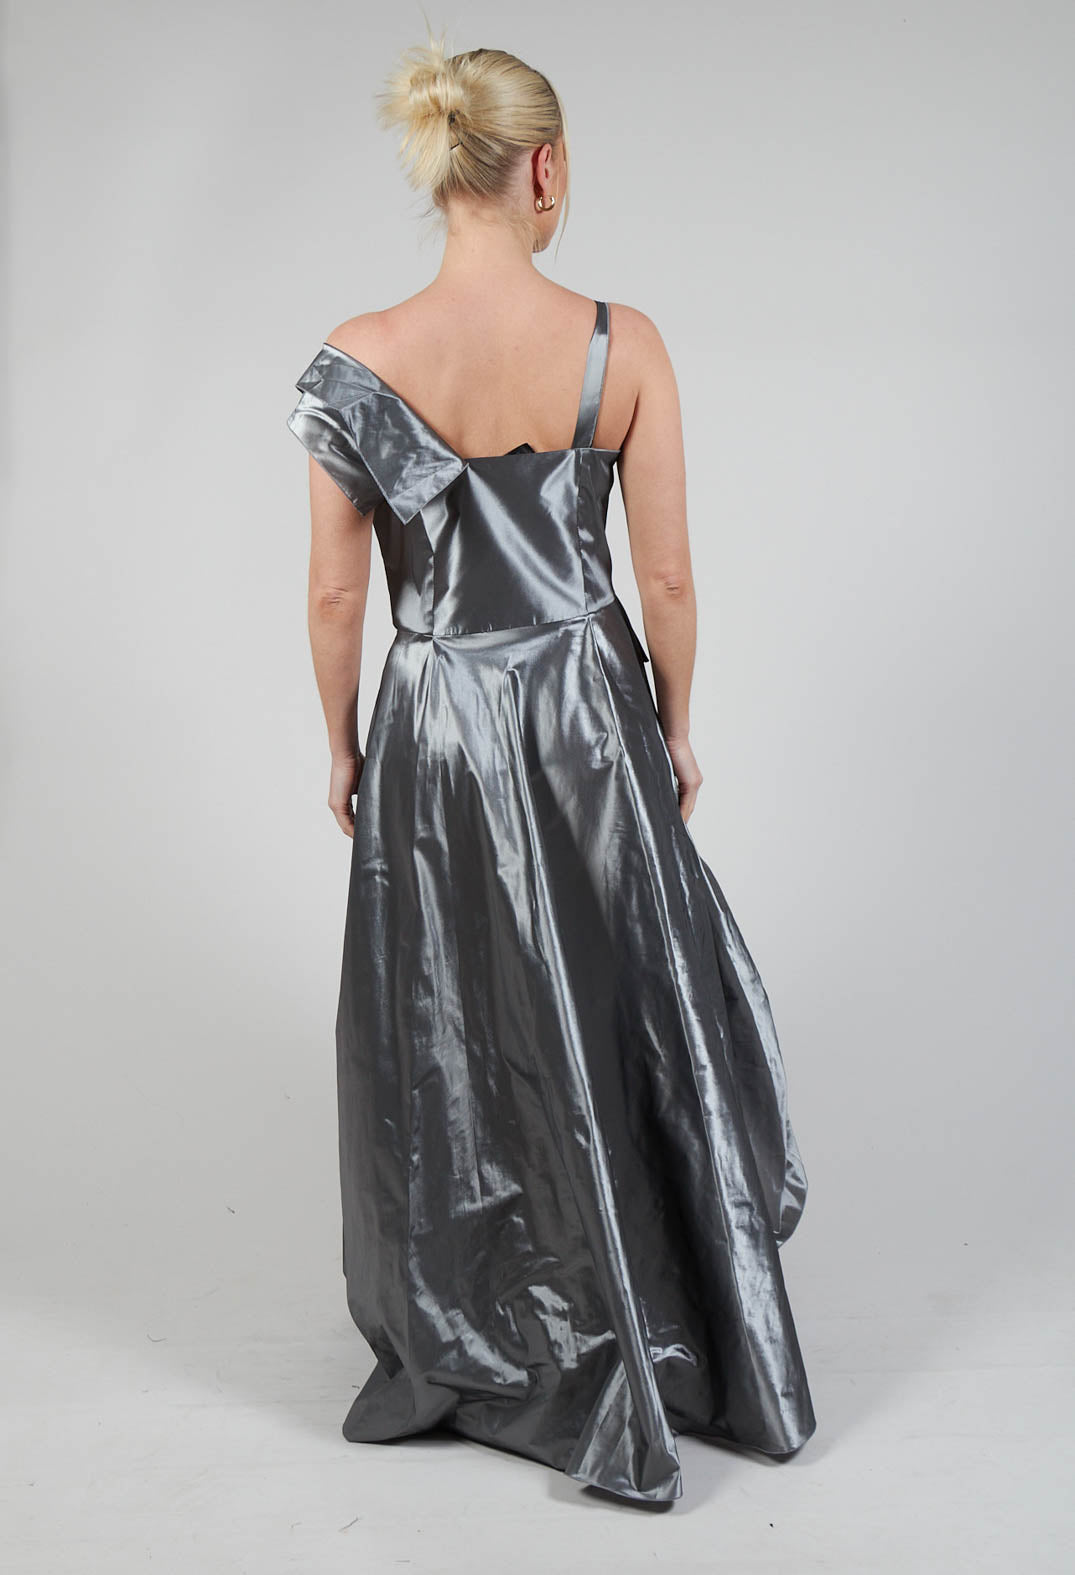 ONGO Dress in Silver